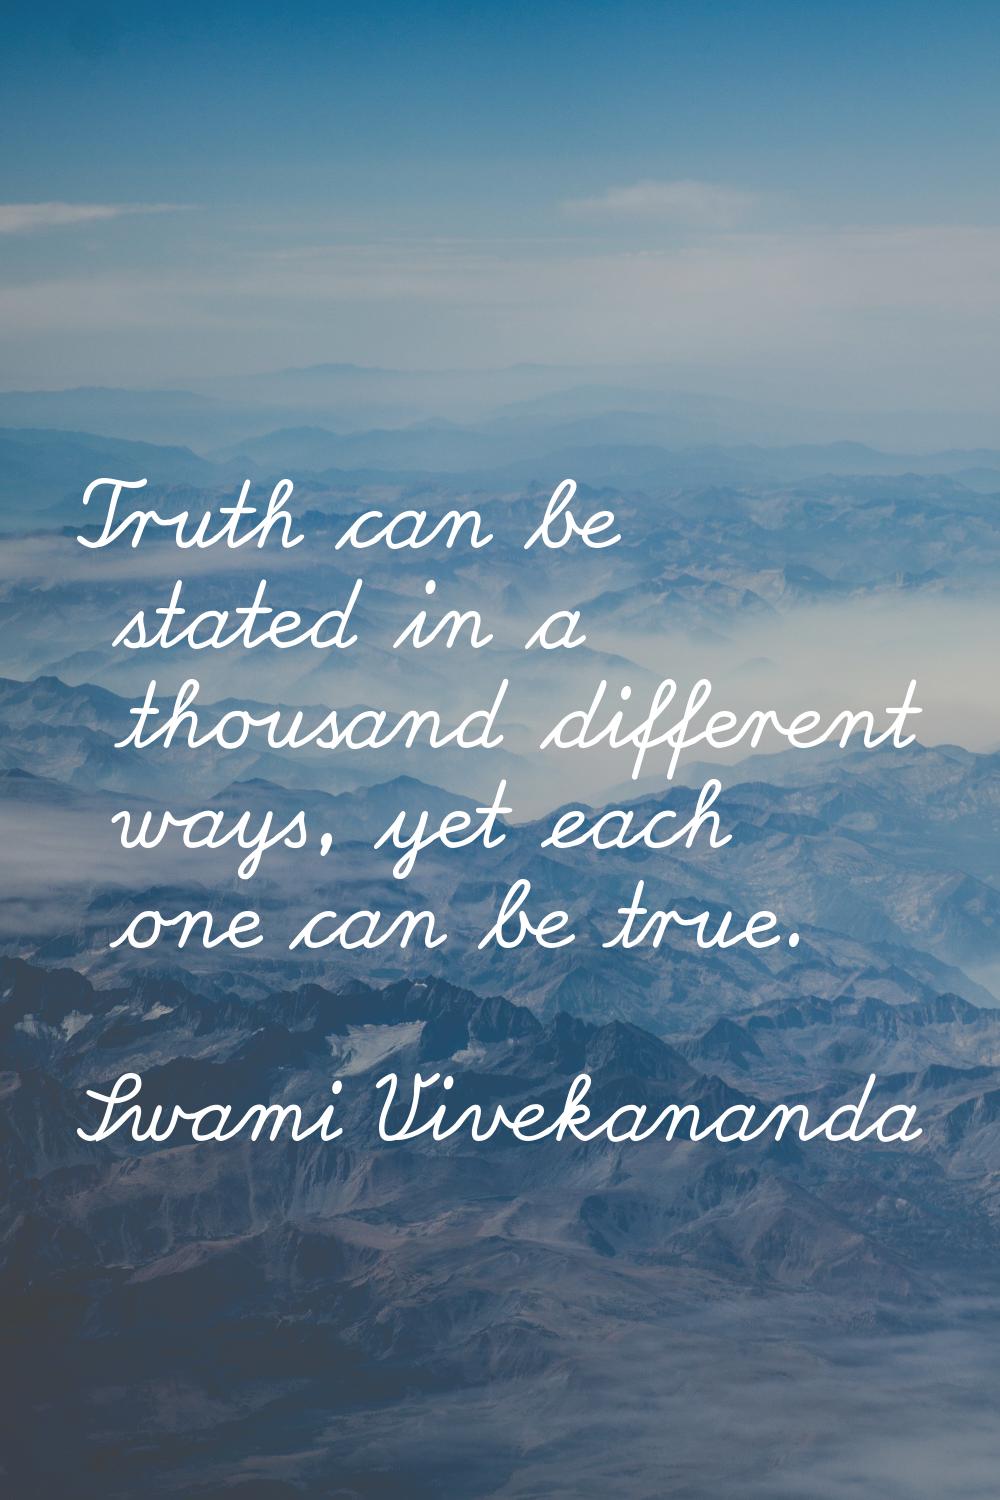 Truth can be stated in a thousand different ways, yet each one can be true.